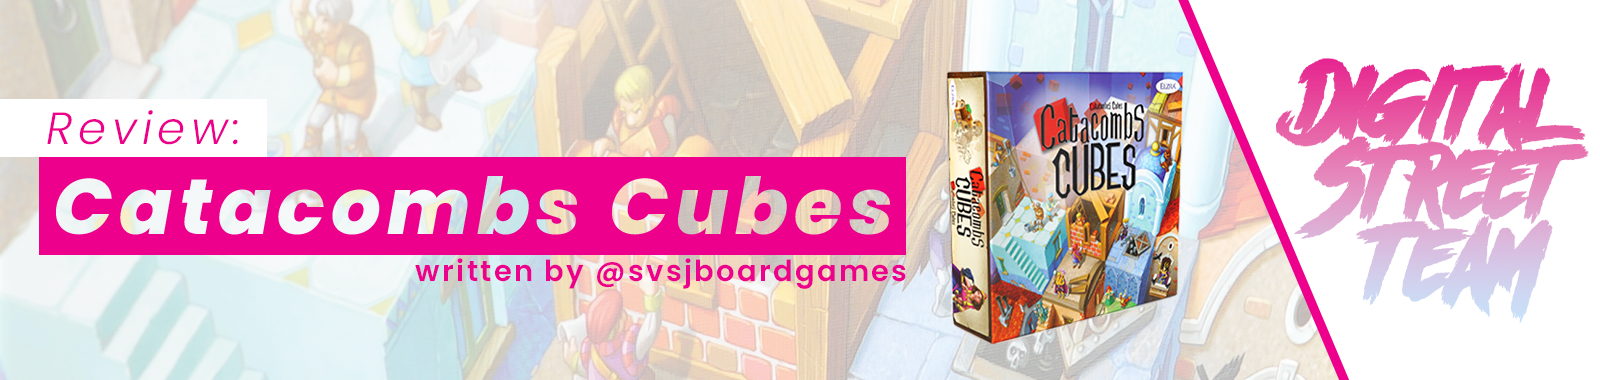 Review: Catacombs Cubes - by @svsjboardgames